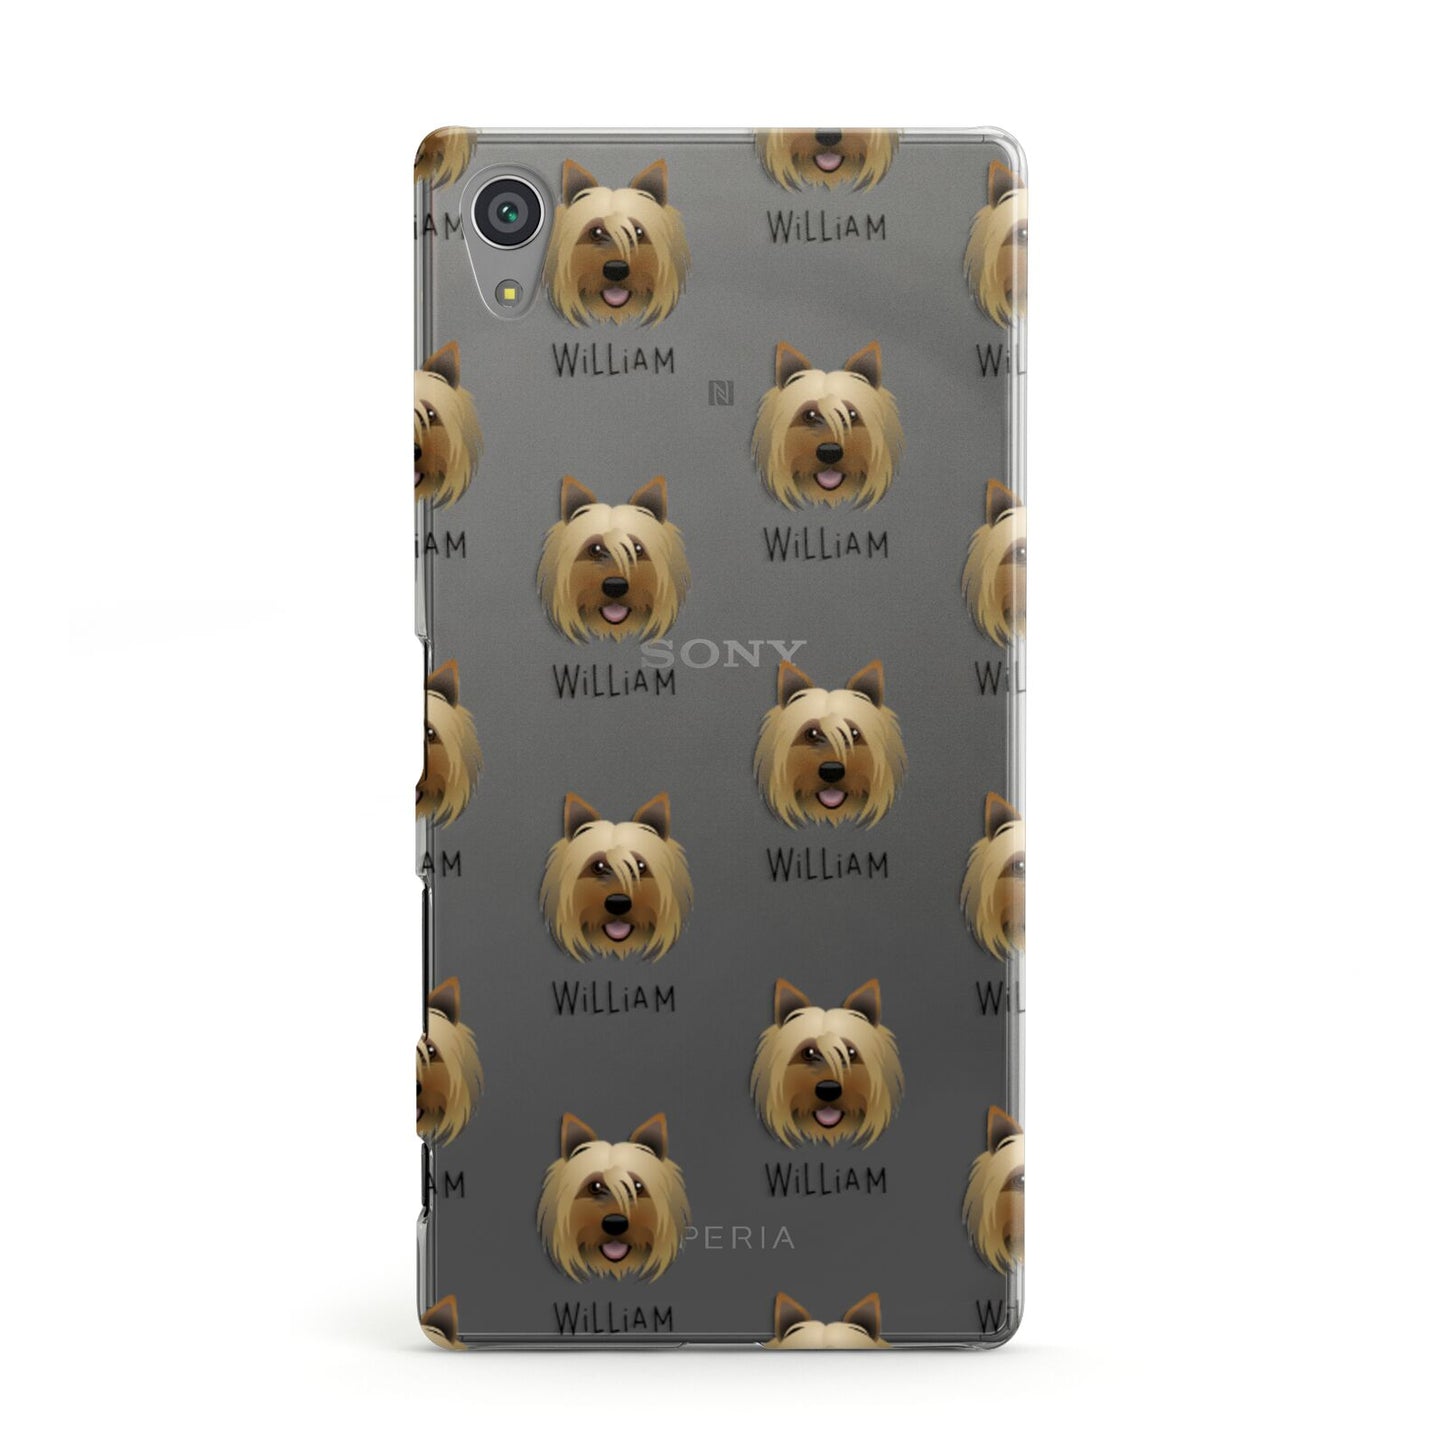 Yorkshire Terrier Icon with Name Sony Xperia Case